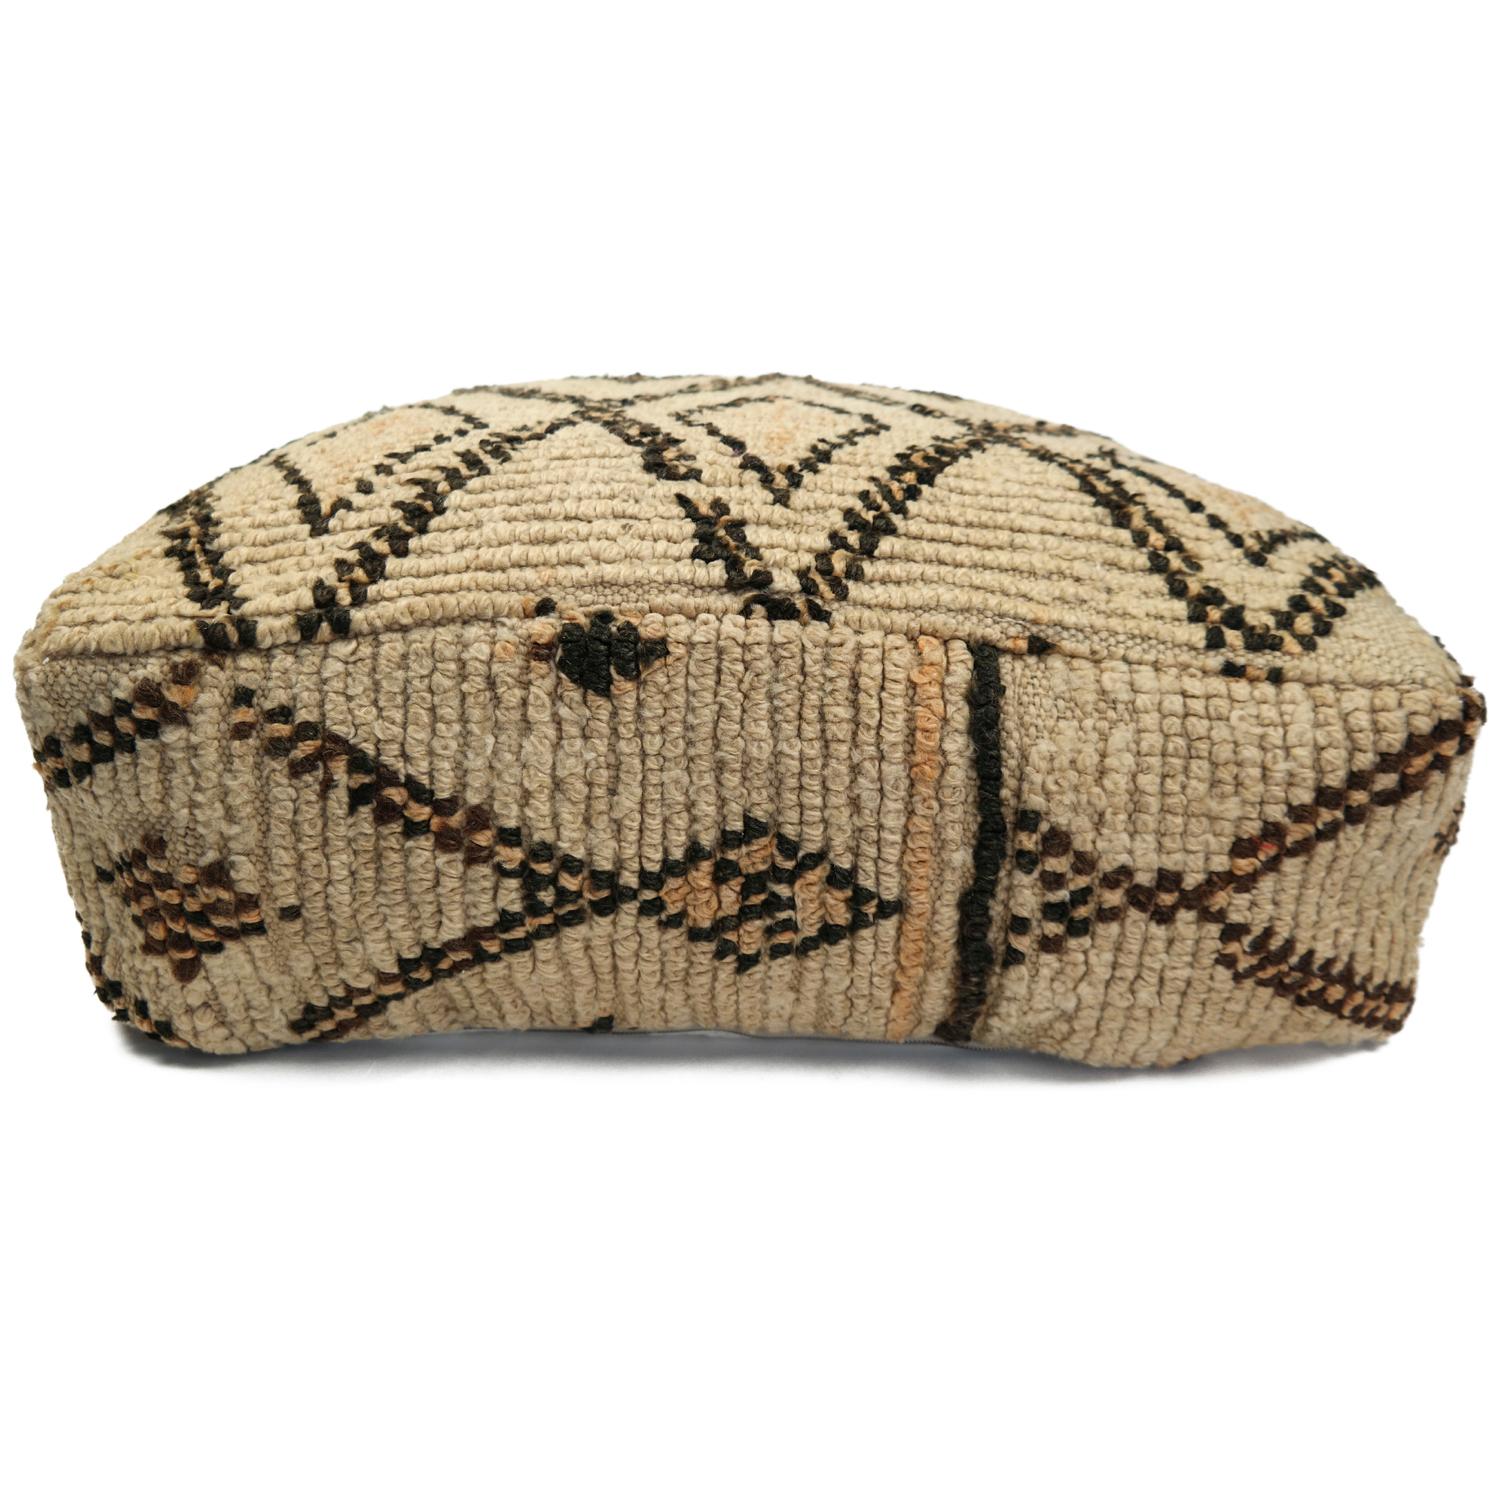 Scandinavian Modern Pouf from Morocco Natural Floor Cushion Moroccan Ottoman For Sale